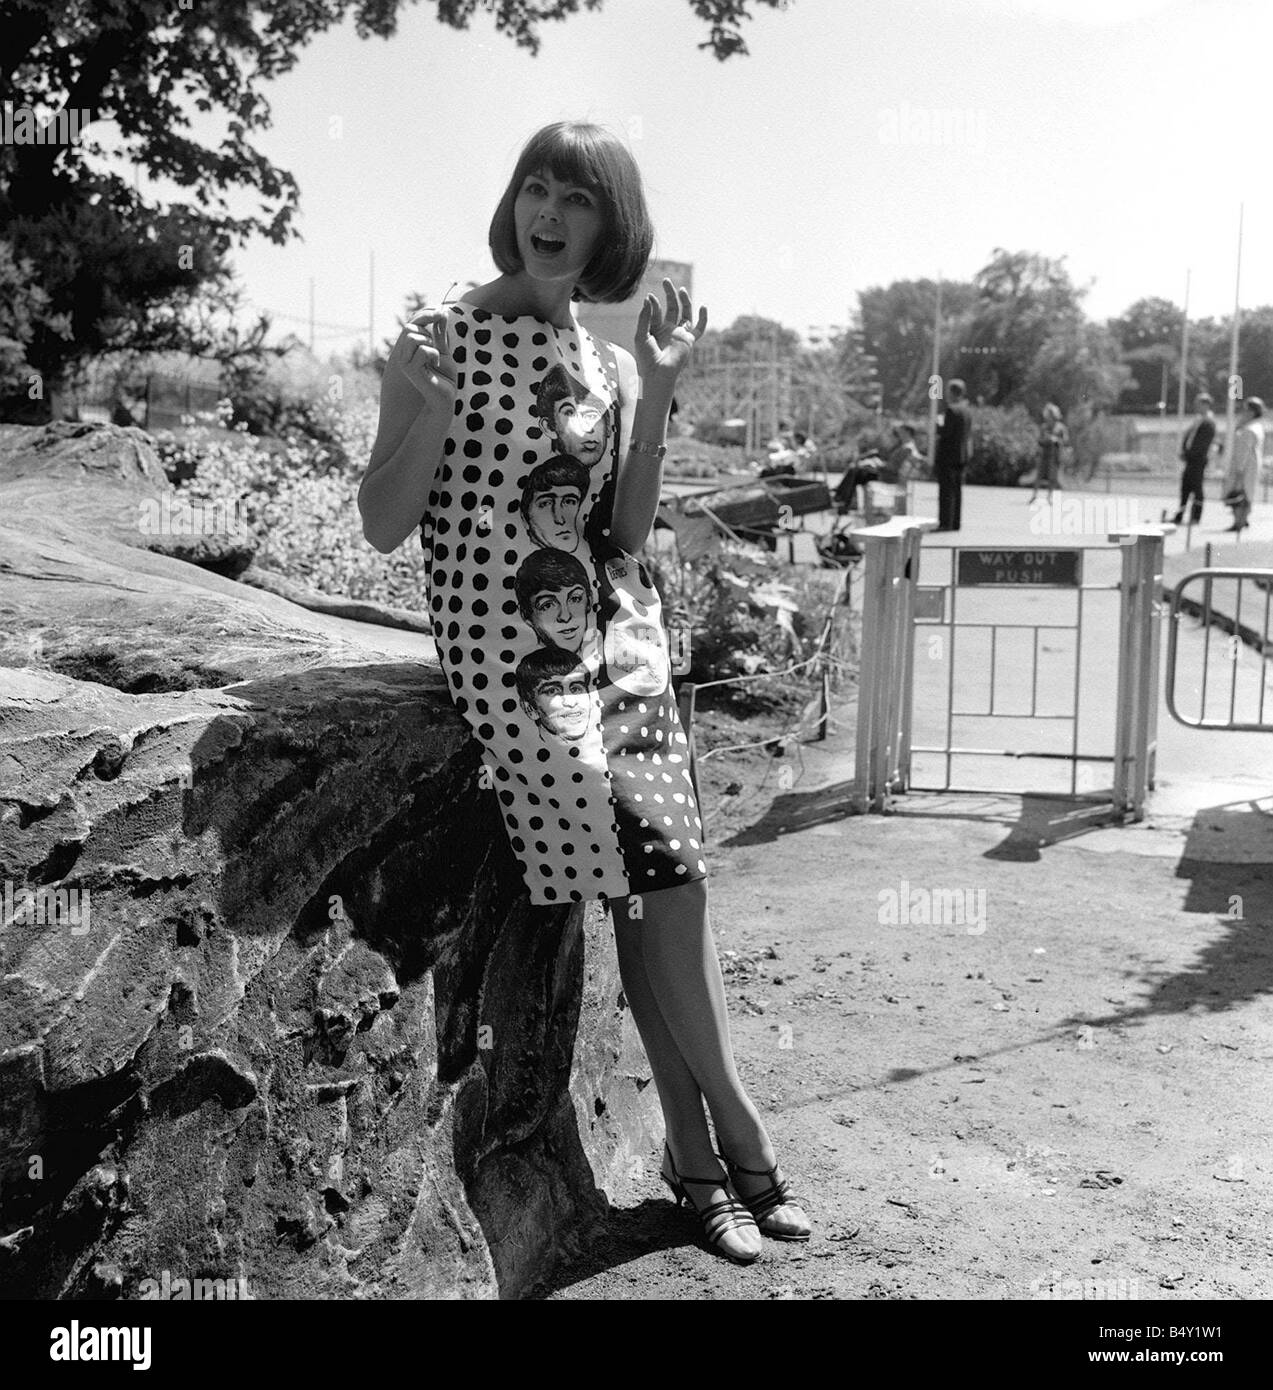 Pop Group The Beatles June 1964 John Lennon Paul McCartney Ringo Starr George Harrison Sandy Hilton modeling a Beatle dress in Battersea Park which will be on sales later this summer in C A modes Stock Photo